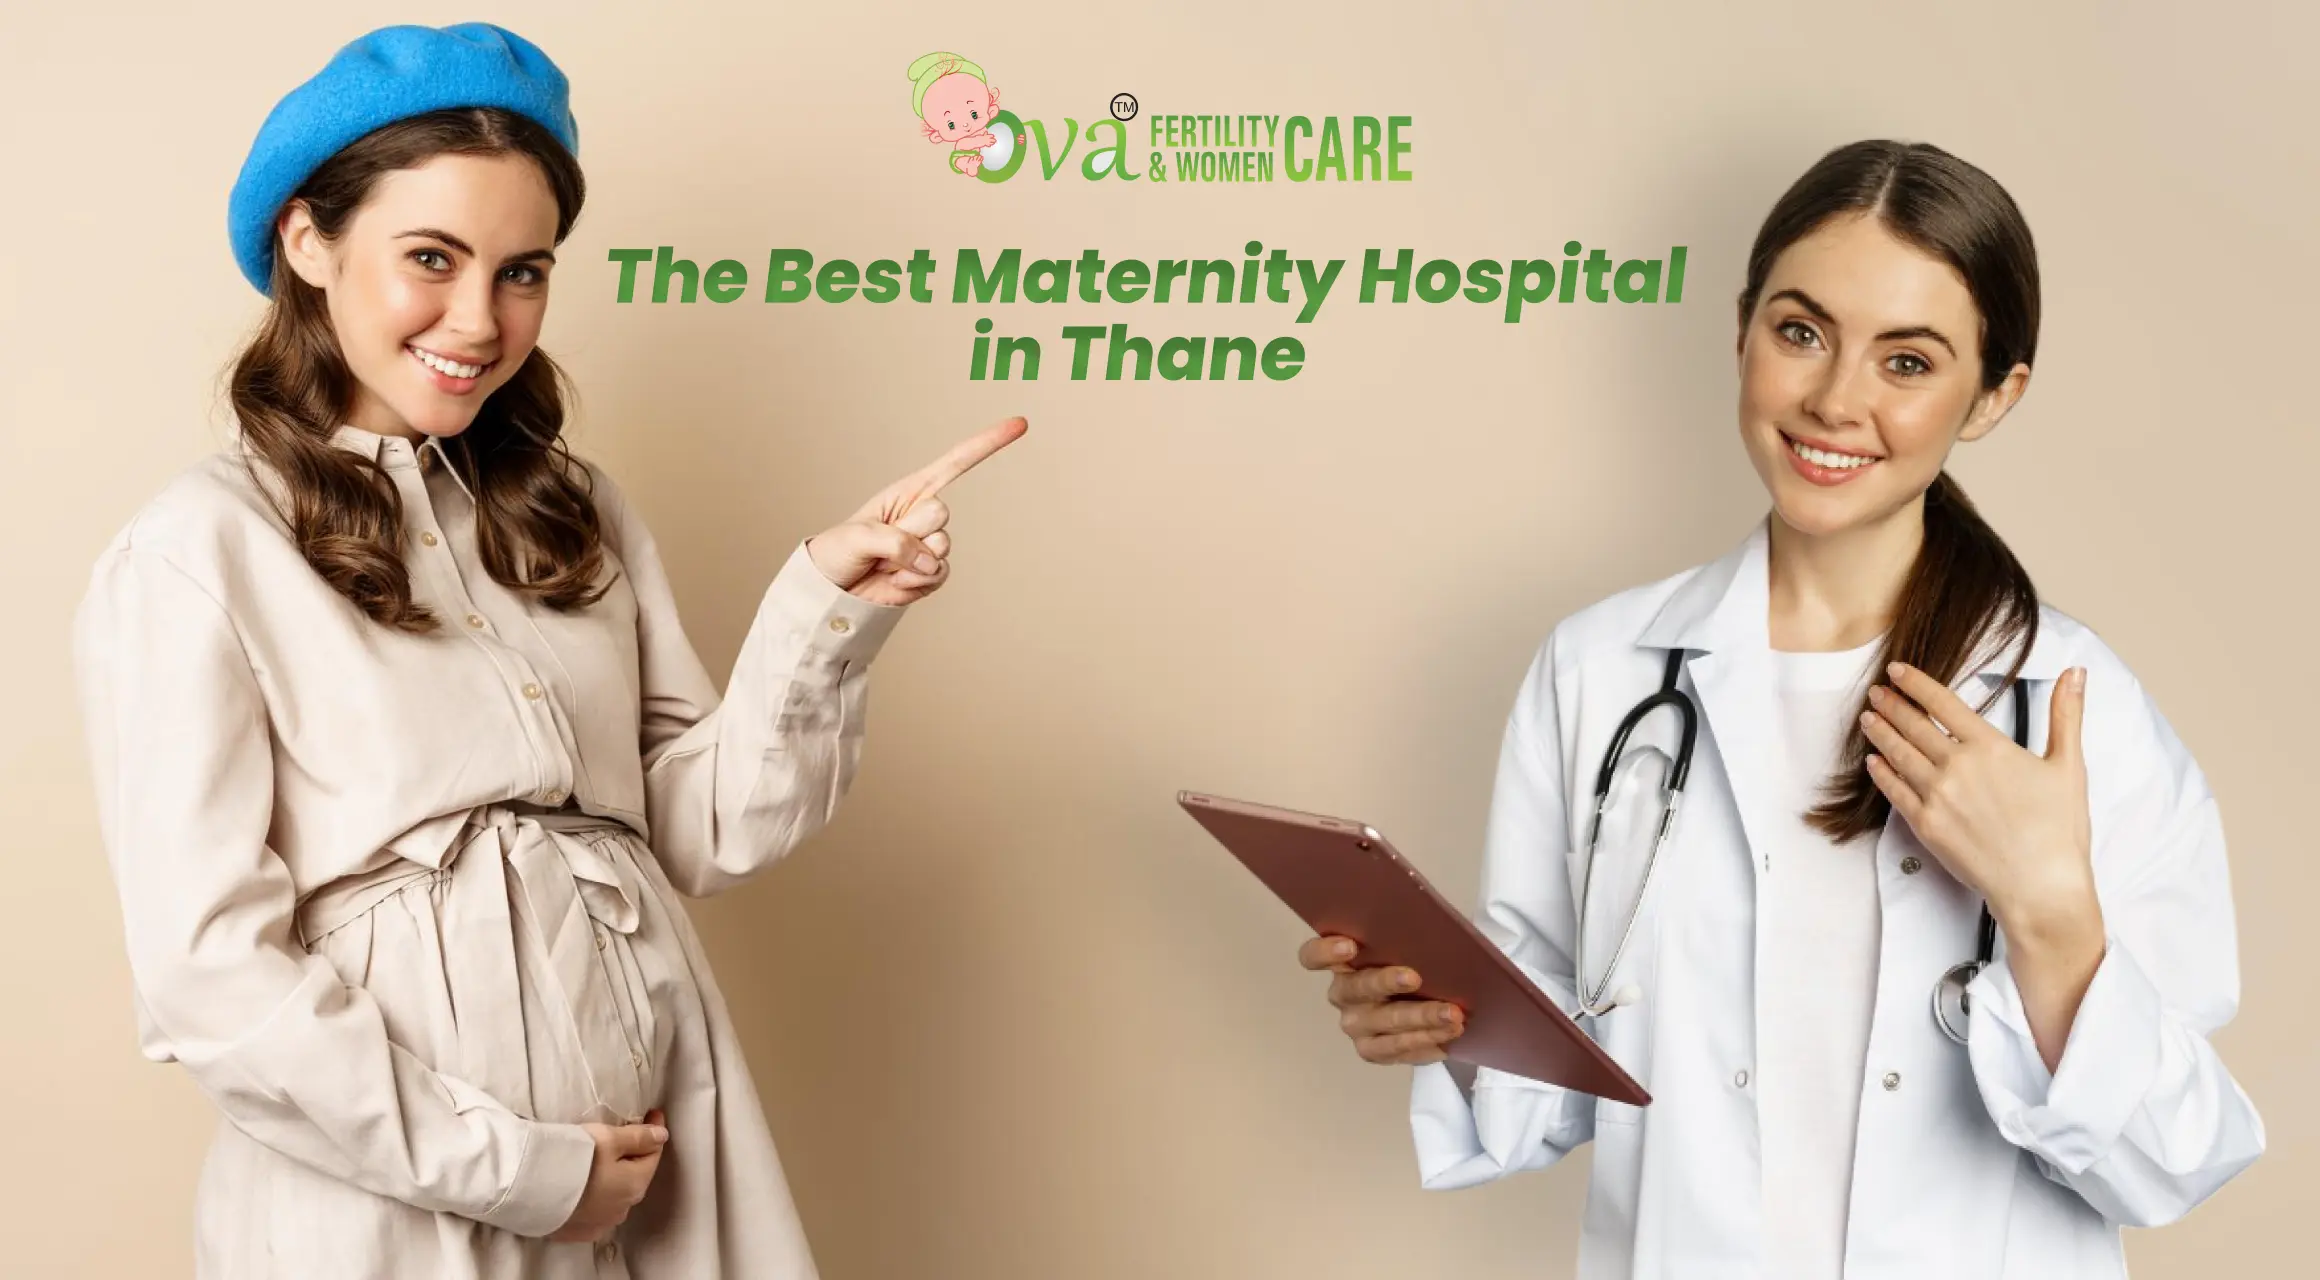 IVF and ICSI Treatment Procedure : Ova Fertility and Women Care		,Thane,Services,Free Classifieds,Post Free Ads,77traders.com